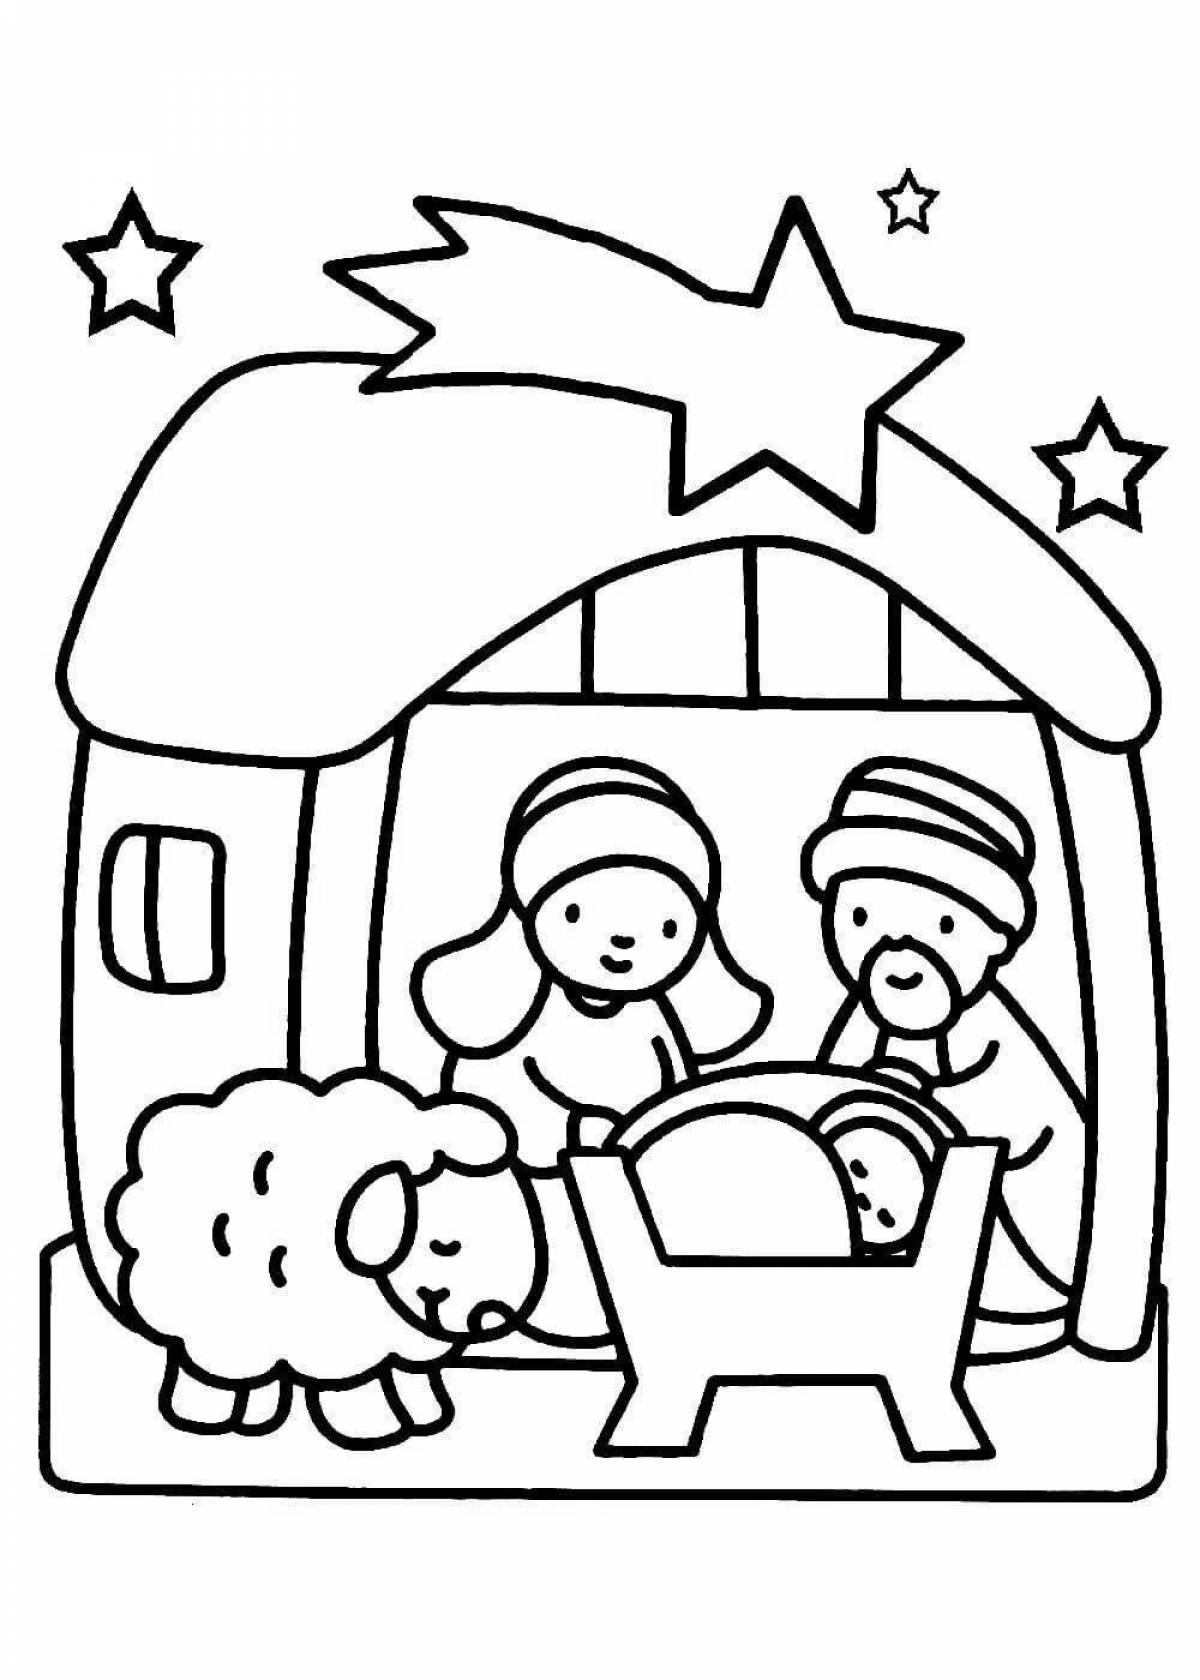 Exquisite Christmas coloring book for 3-4 year olds